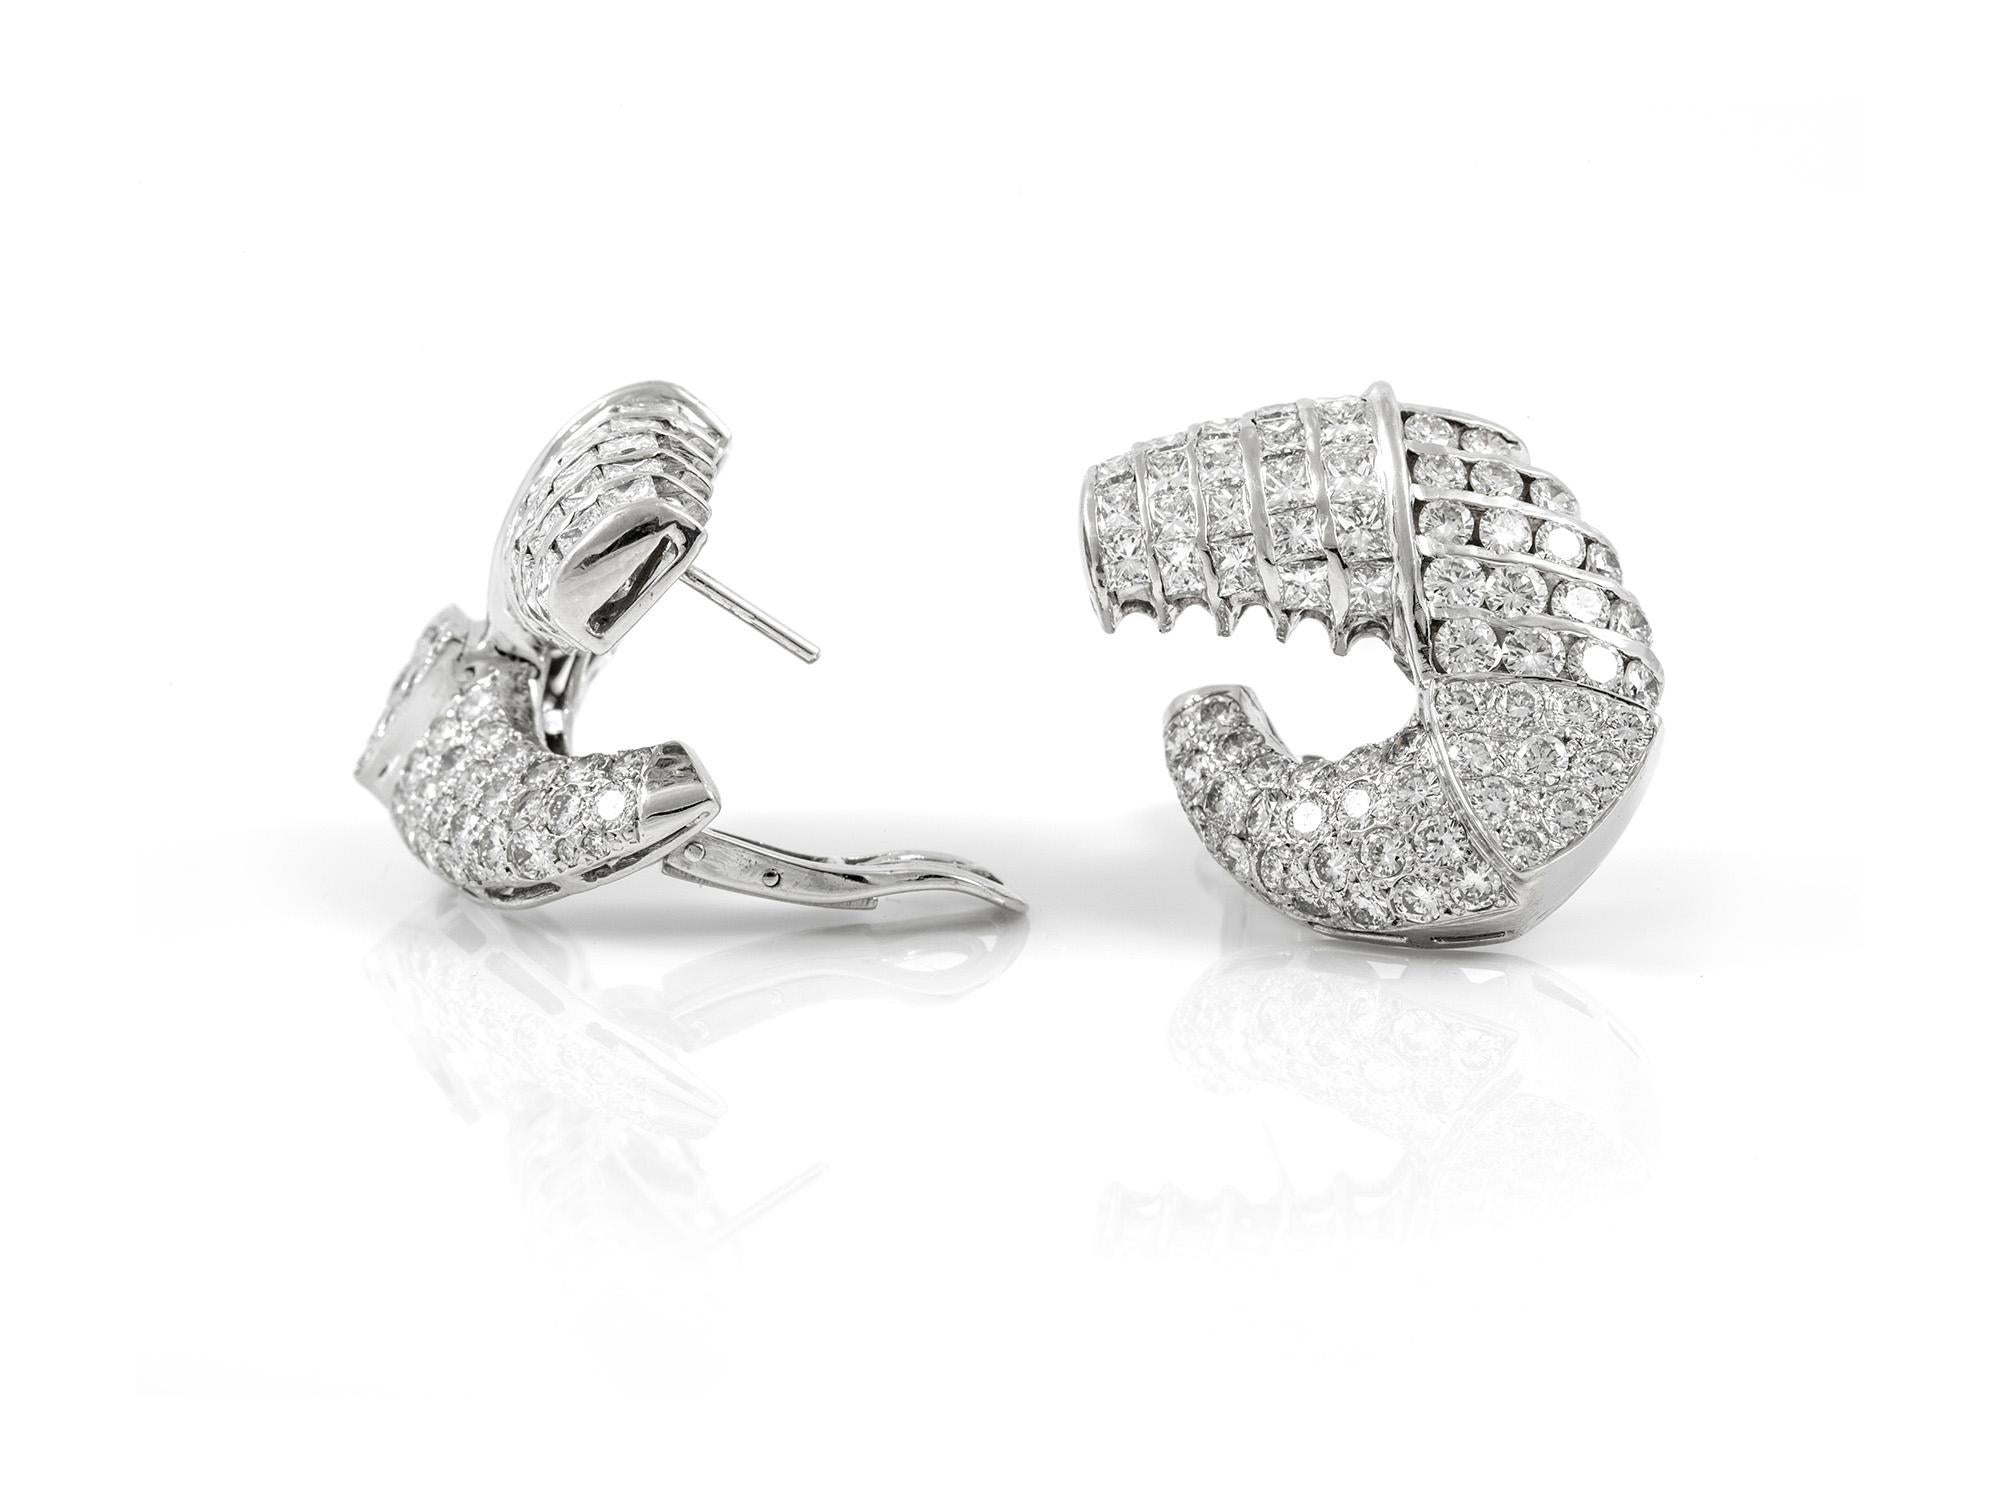 The earrings are finely crafted in 18k white gold with diamonds weighing approximately total of 11.00 carat.